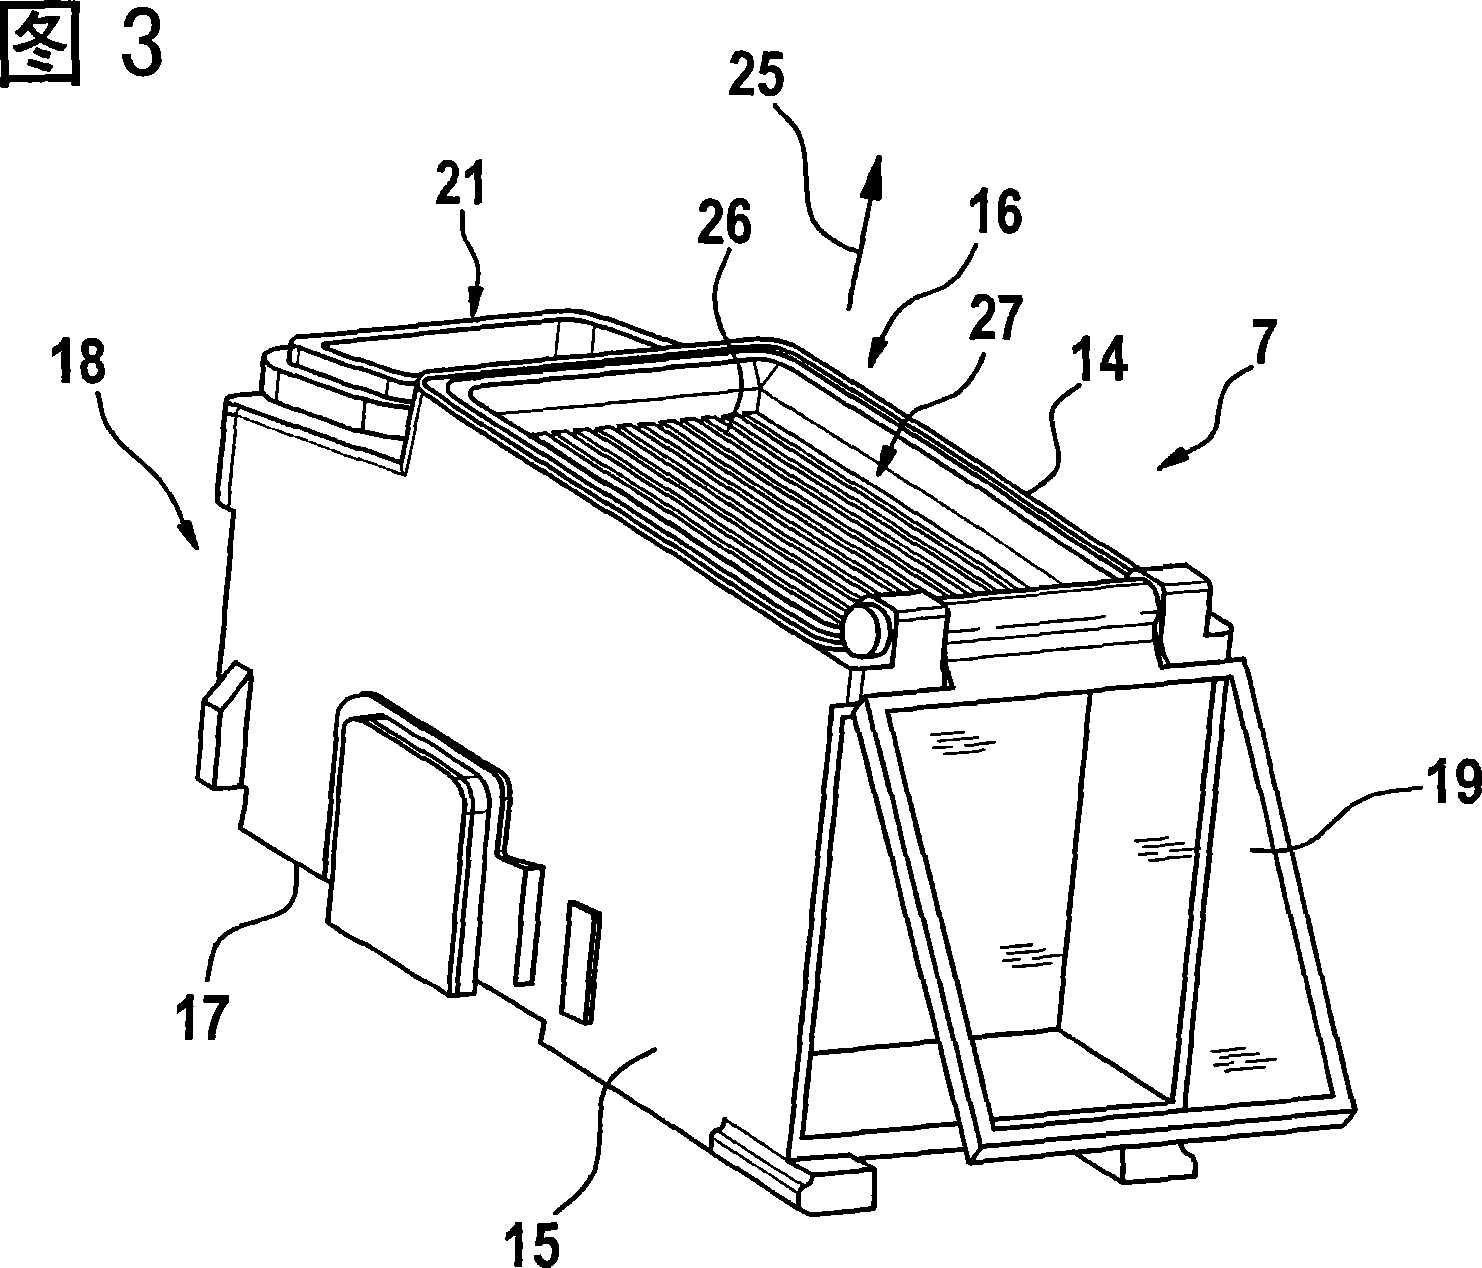 Dust collection device for an handheld electrical tool